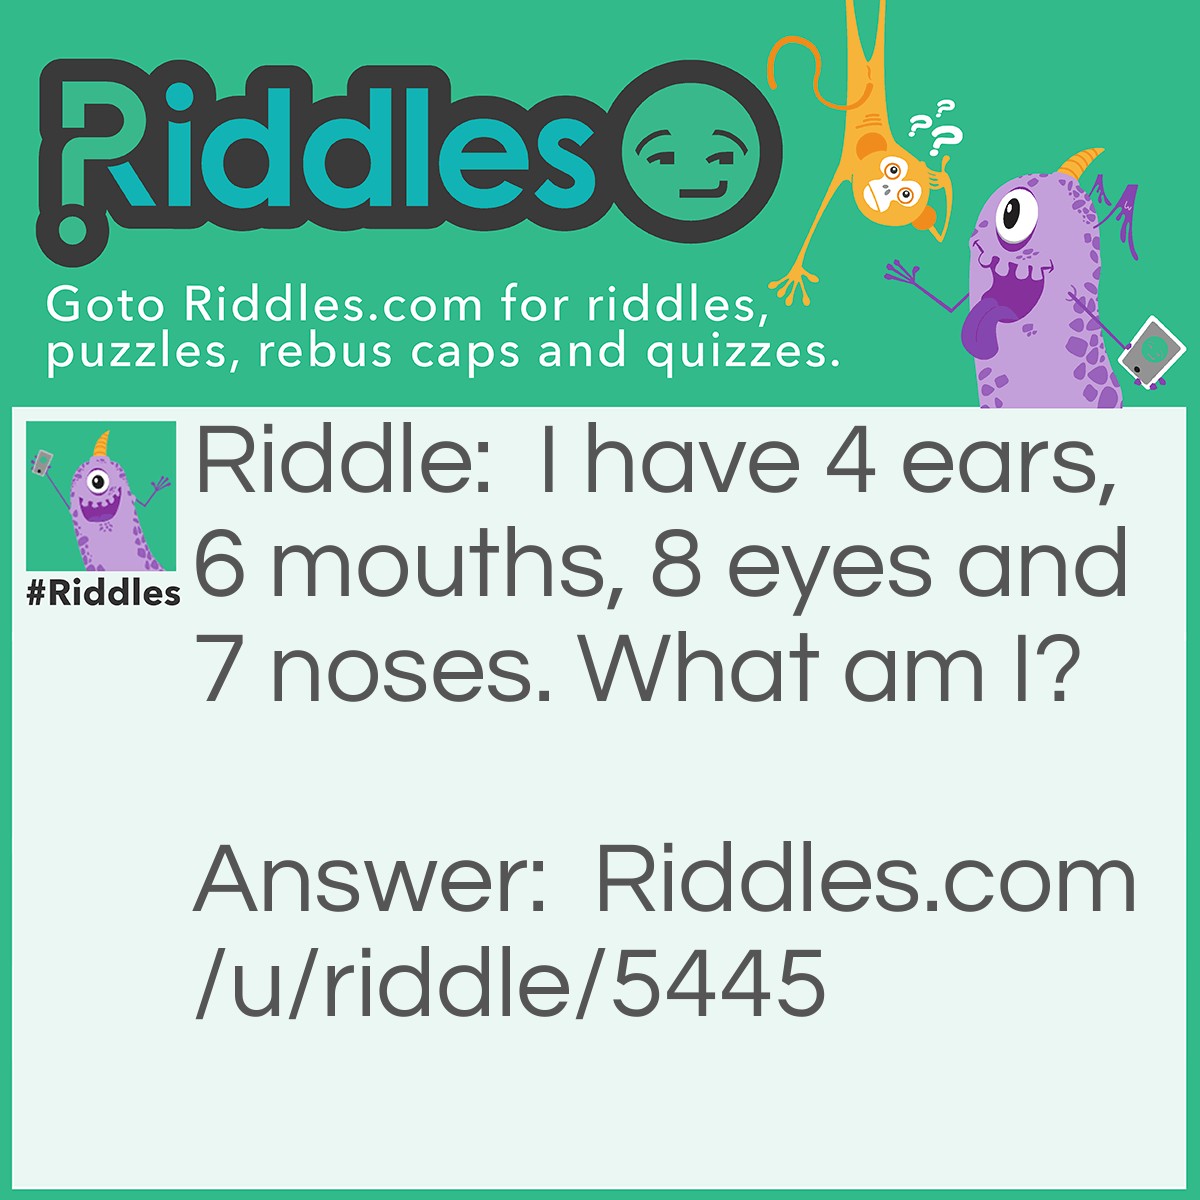 Riddle: I have 4 ears, 6 mouths, 8 eyes and 7 noses. What am I? Answer: Ugly.